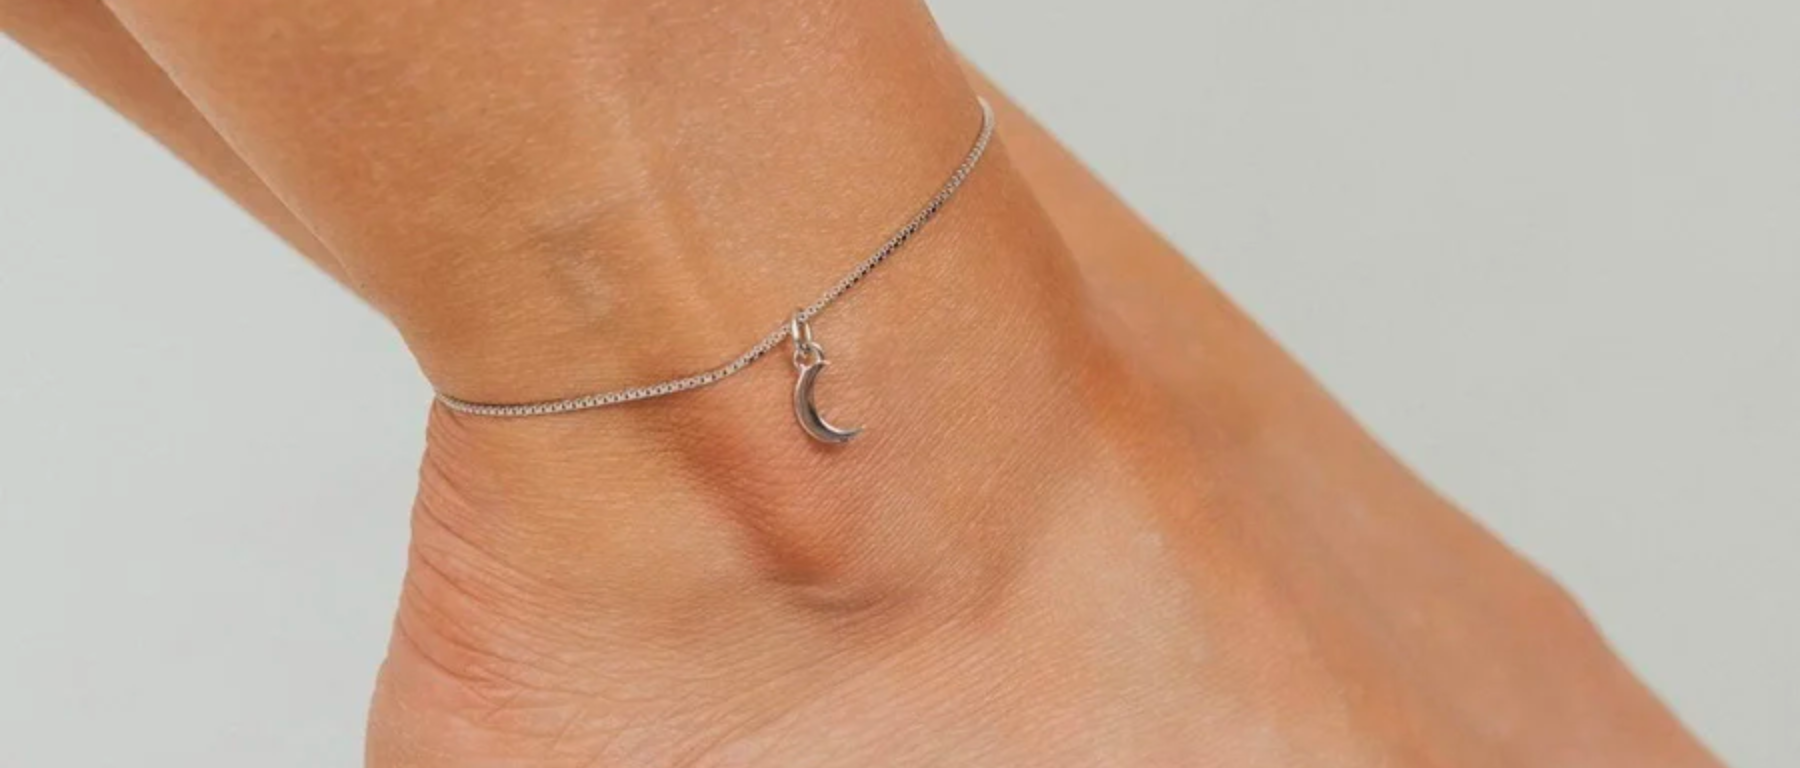 wehoautodetail CRESCENT MOON CHARM ADJUSTABLE ANKLET